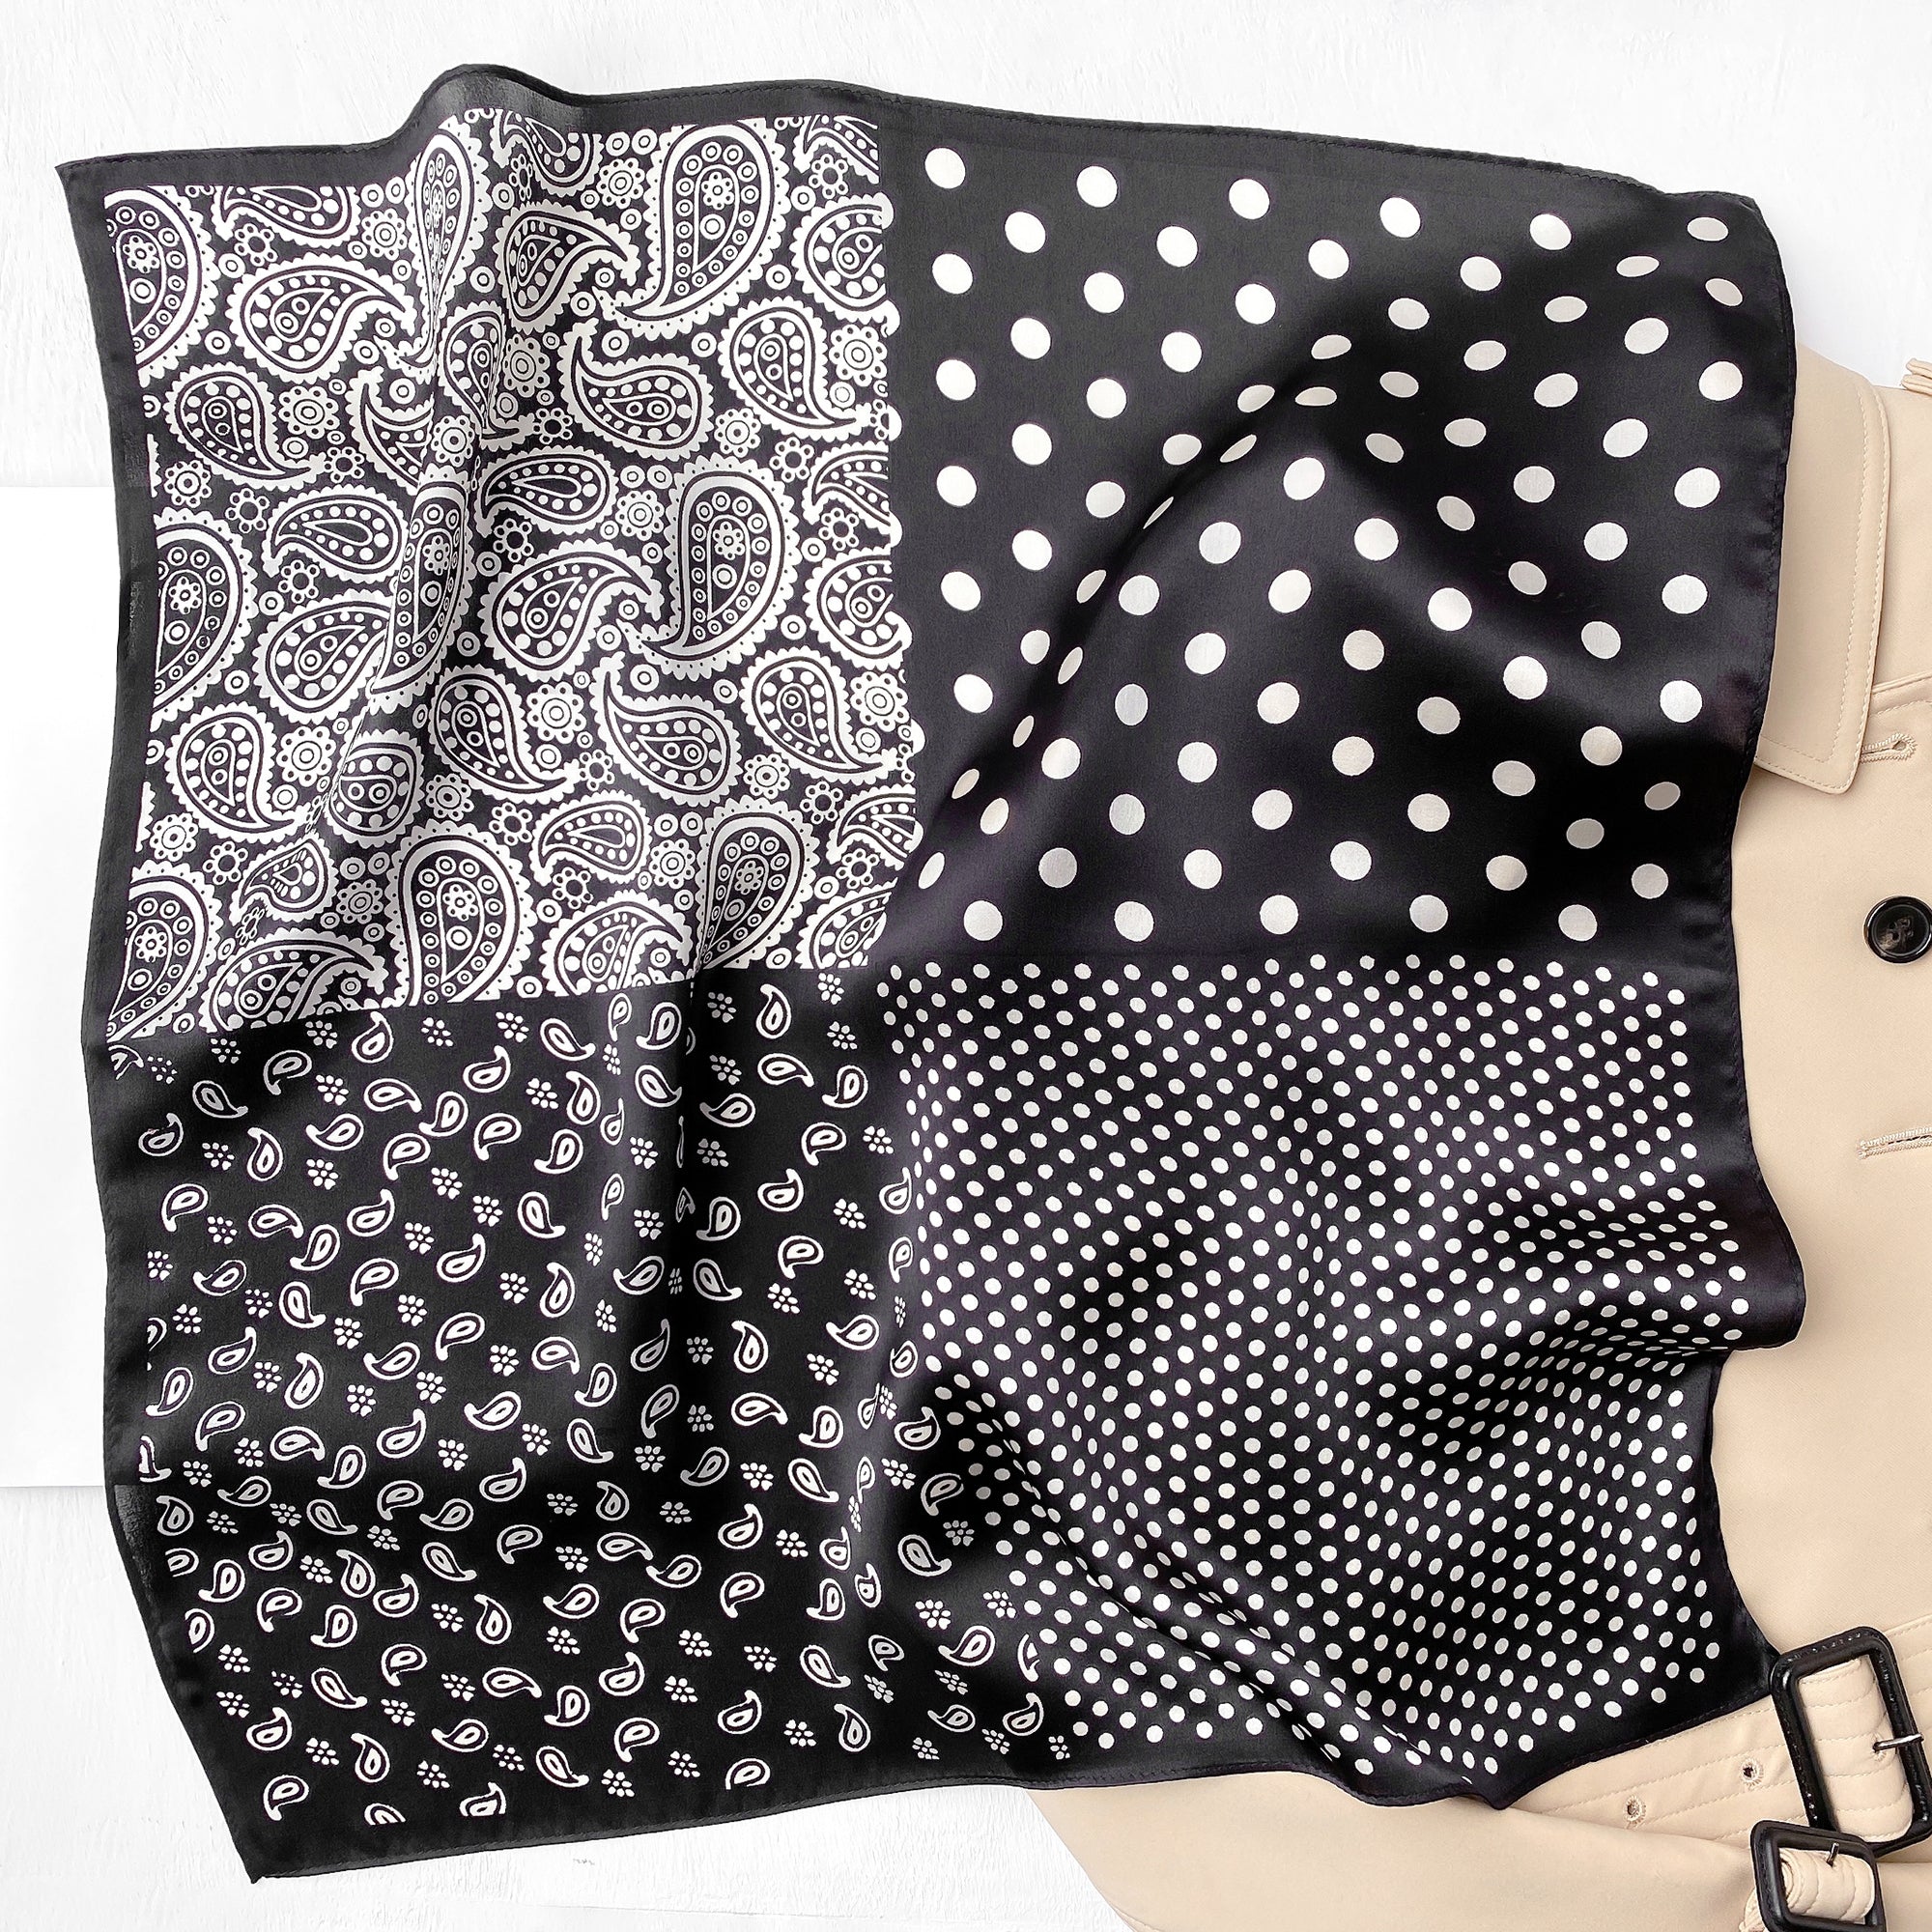 a black square silk scarf neckerchief featuring white paisley and polka dots pattern